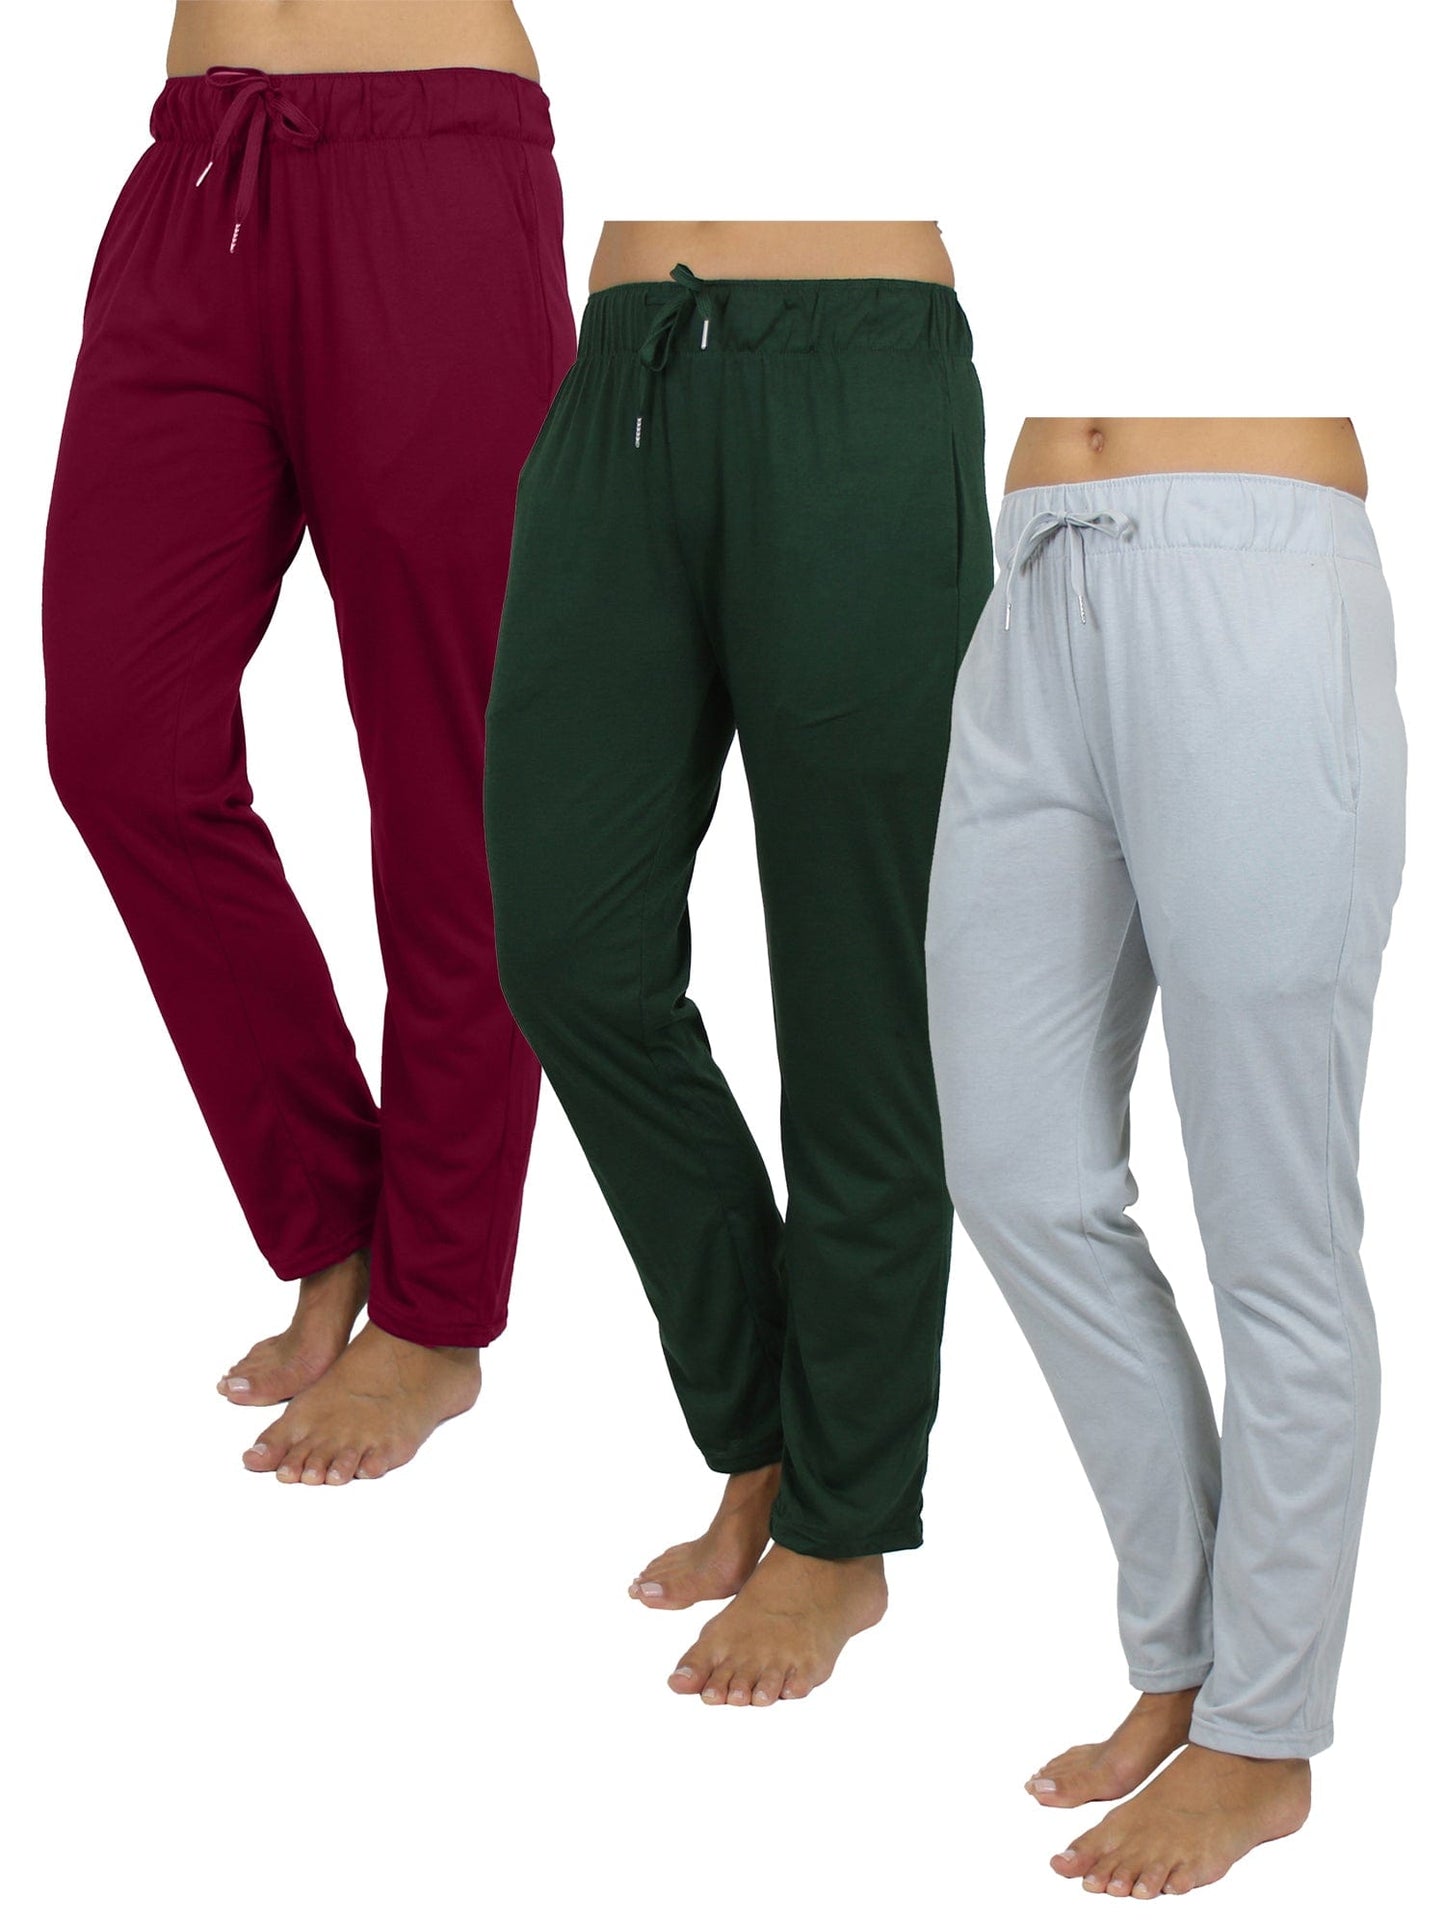 Women's 3 Pack Loose Fit Classic Lounge Pants (Sizes, S-3XL) - GalaxybyHarvic